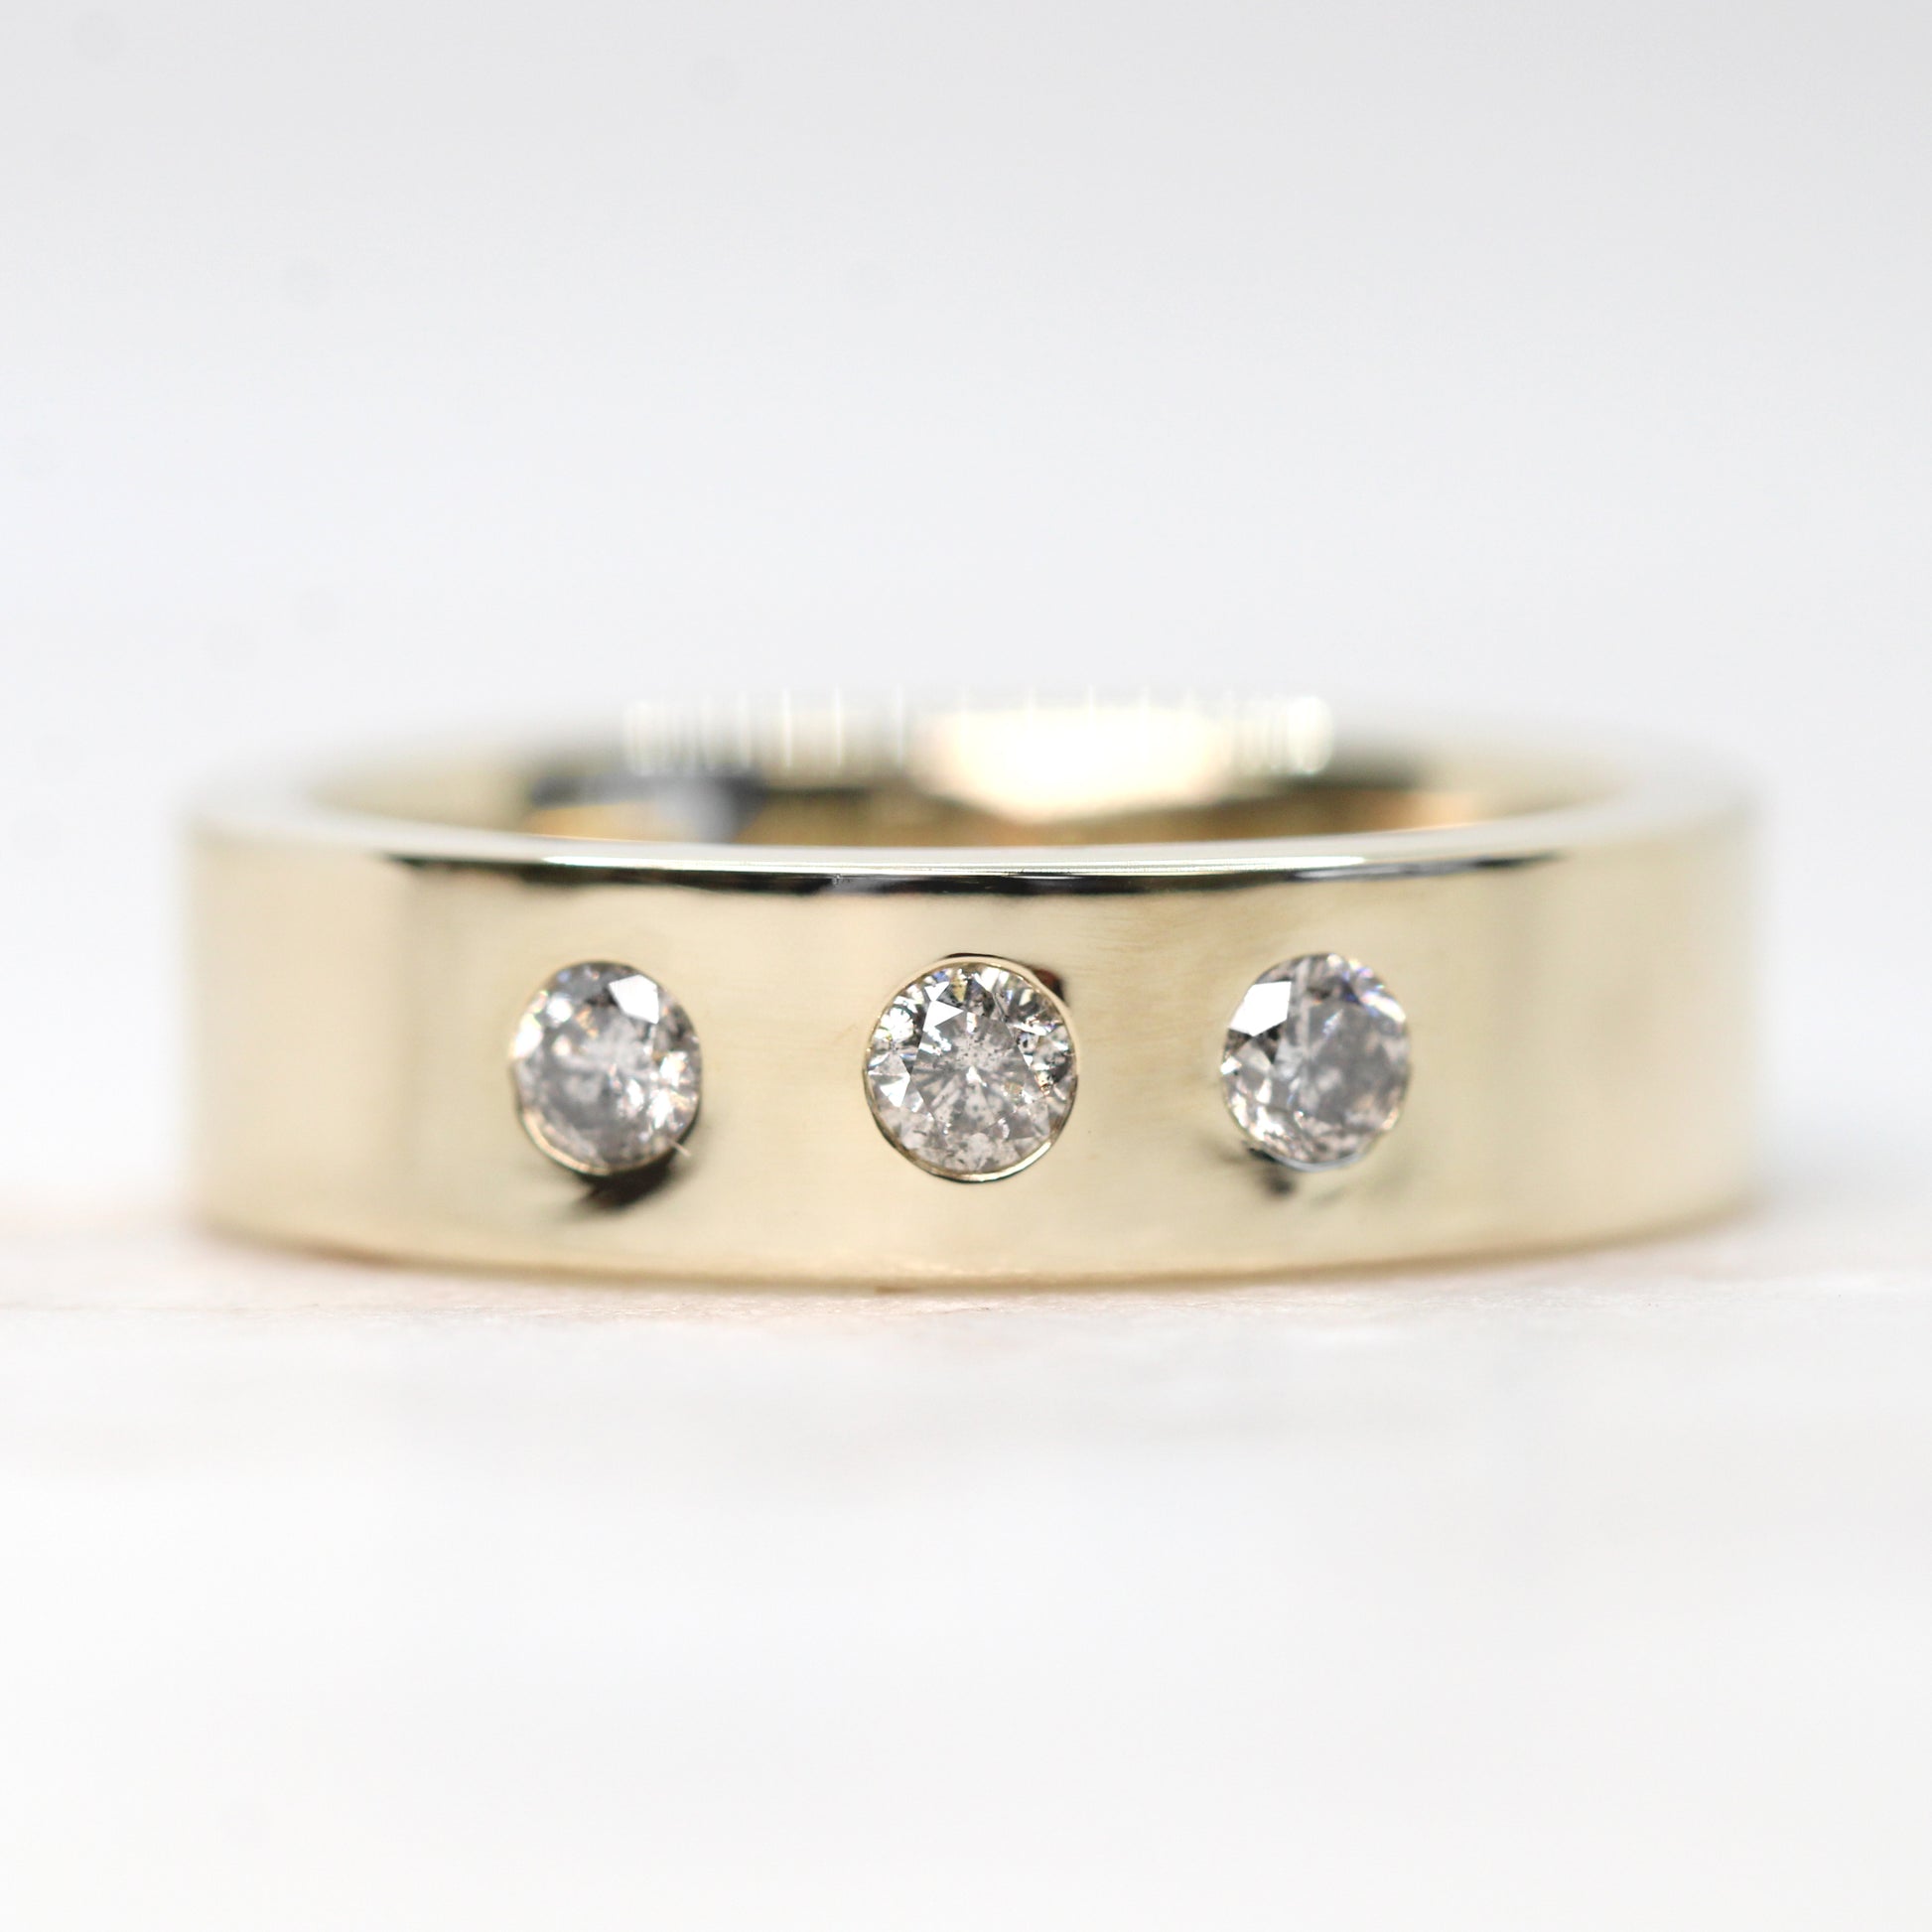 Samantha - Rowan Band - Unisex Wedding Band - Made to Order, Choose Your Gold Tone - Midwinter Co. Alternative Bridal Rings and Modern Fine Jewelry